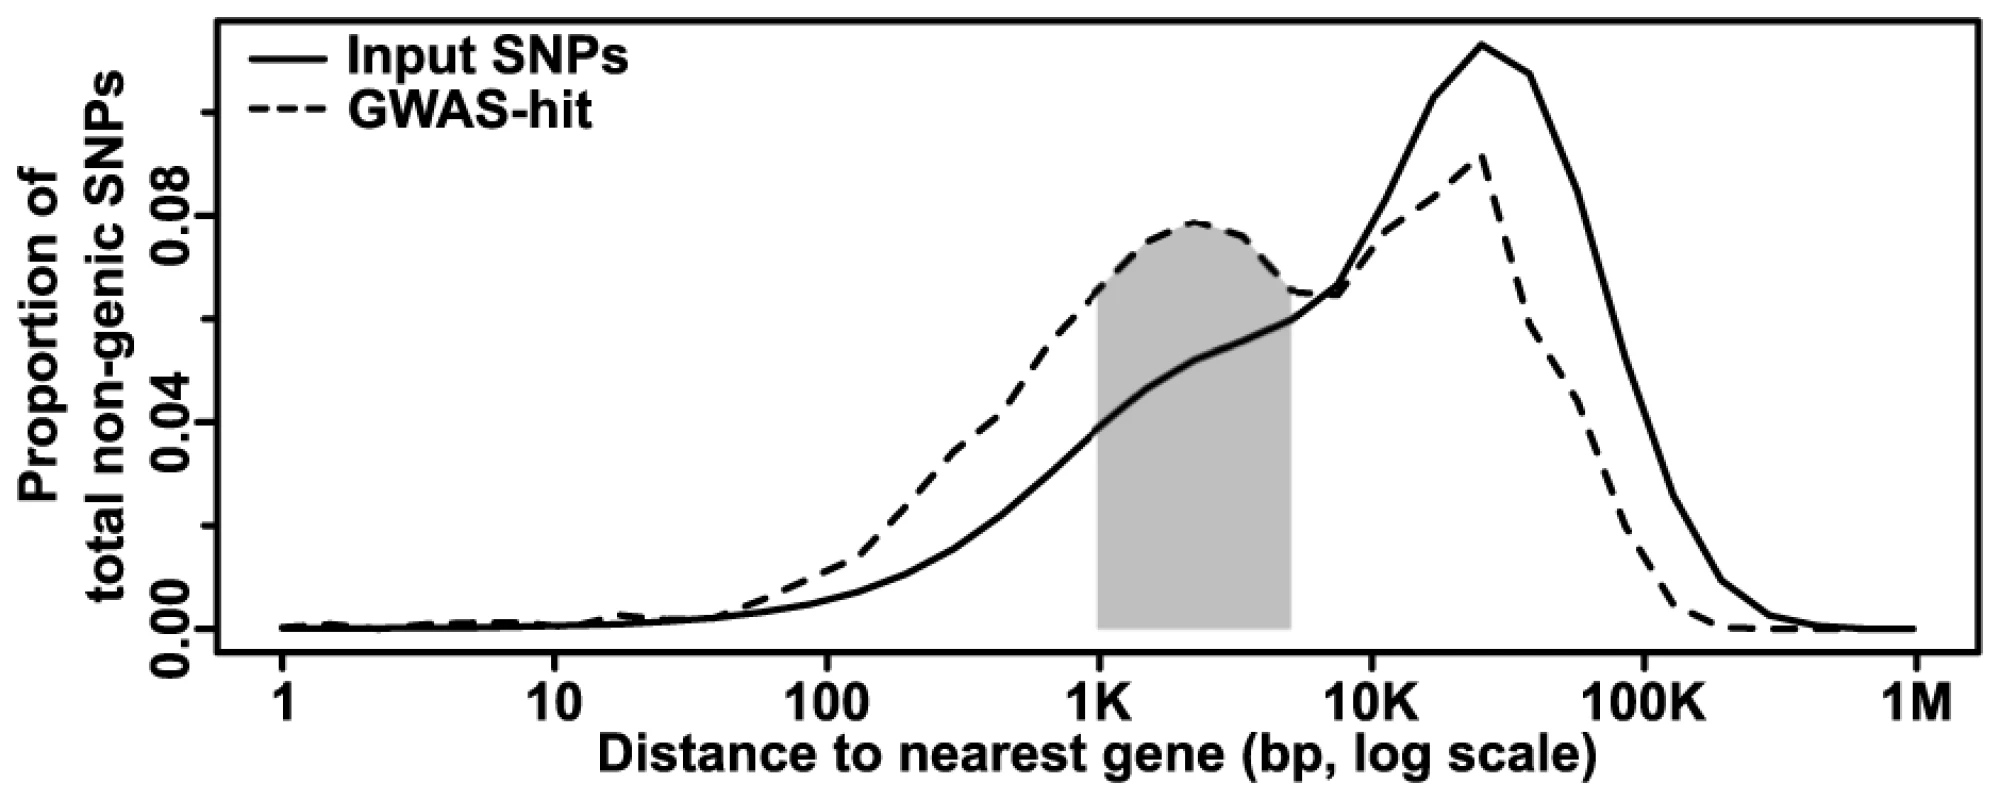 Distribution of non-genic GWAS hits as a function of gene distance.